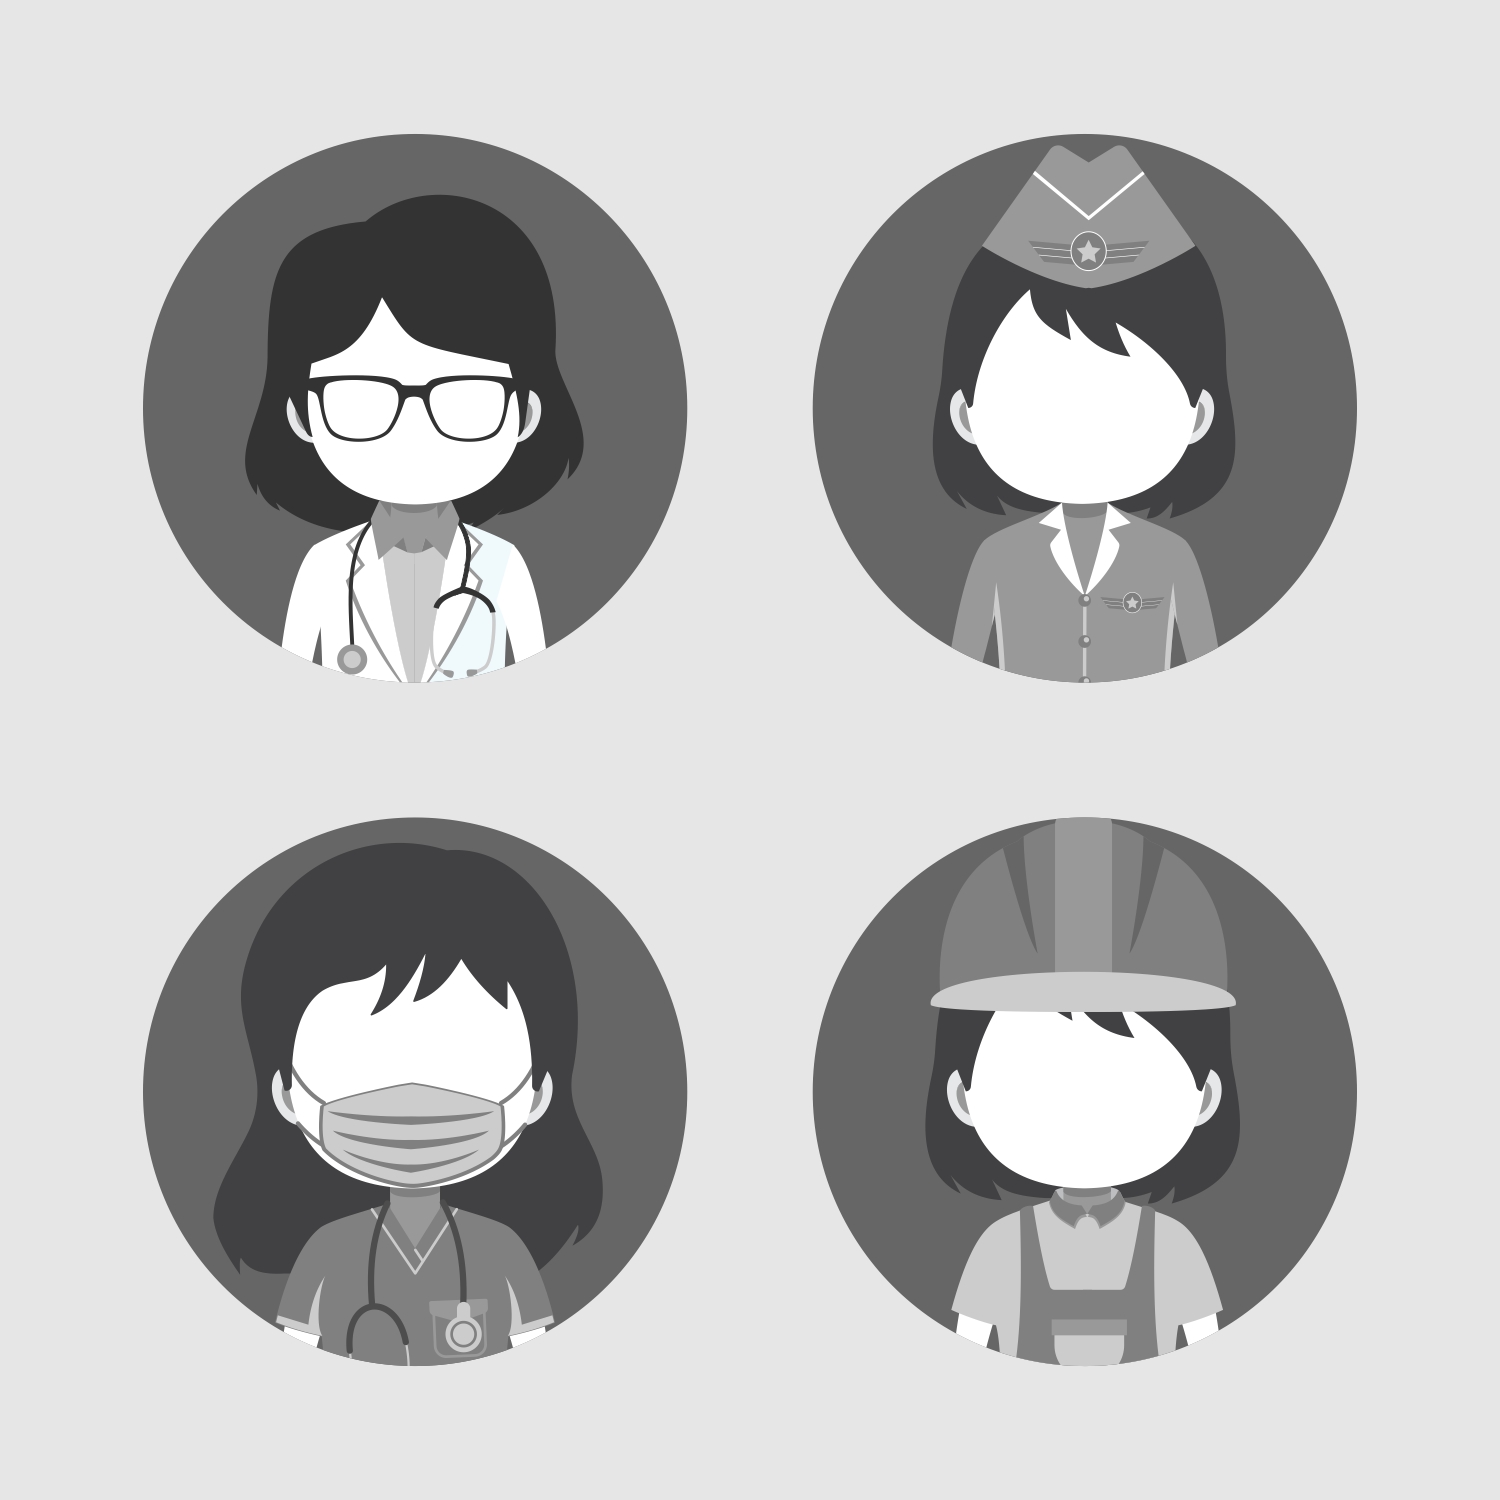 Free vector Great Variety Female Workers with No Expression Avatars design CDR file download free